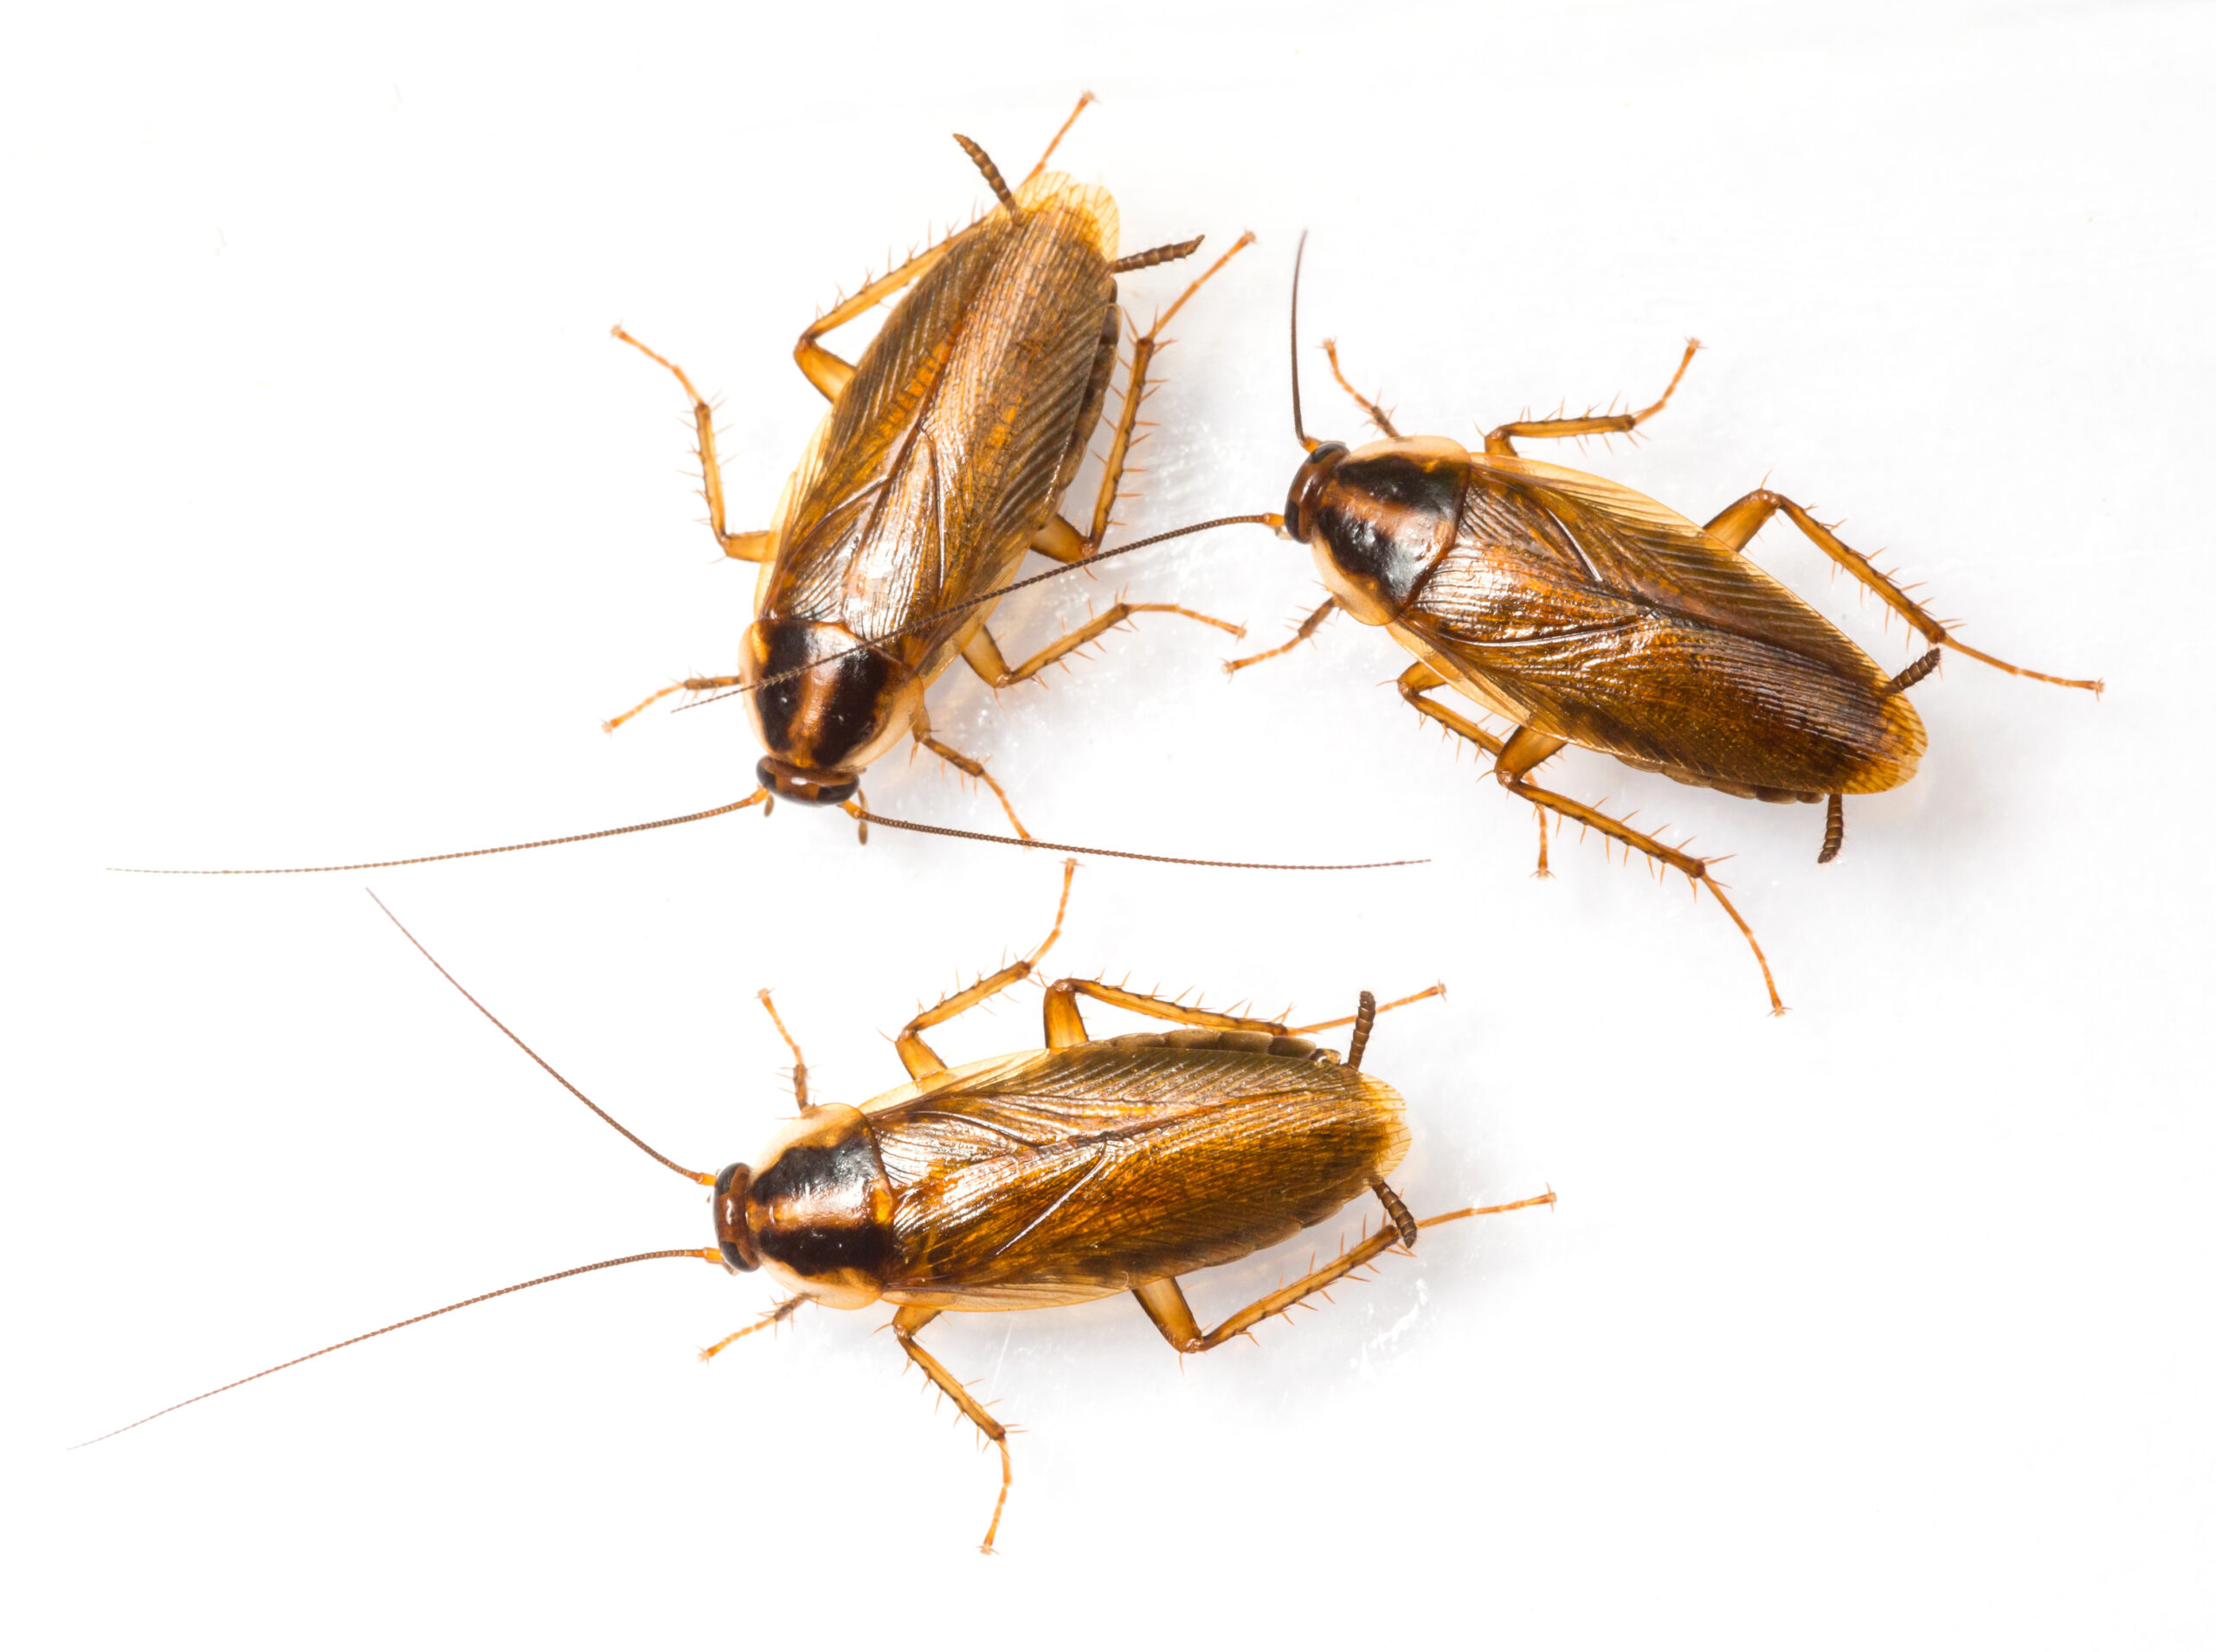 Research reveals German cockroaches evolved via human activity